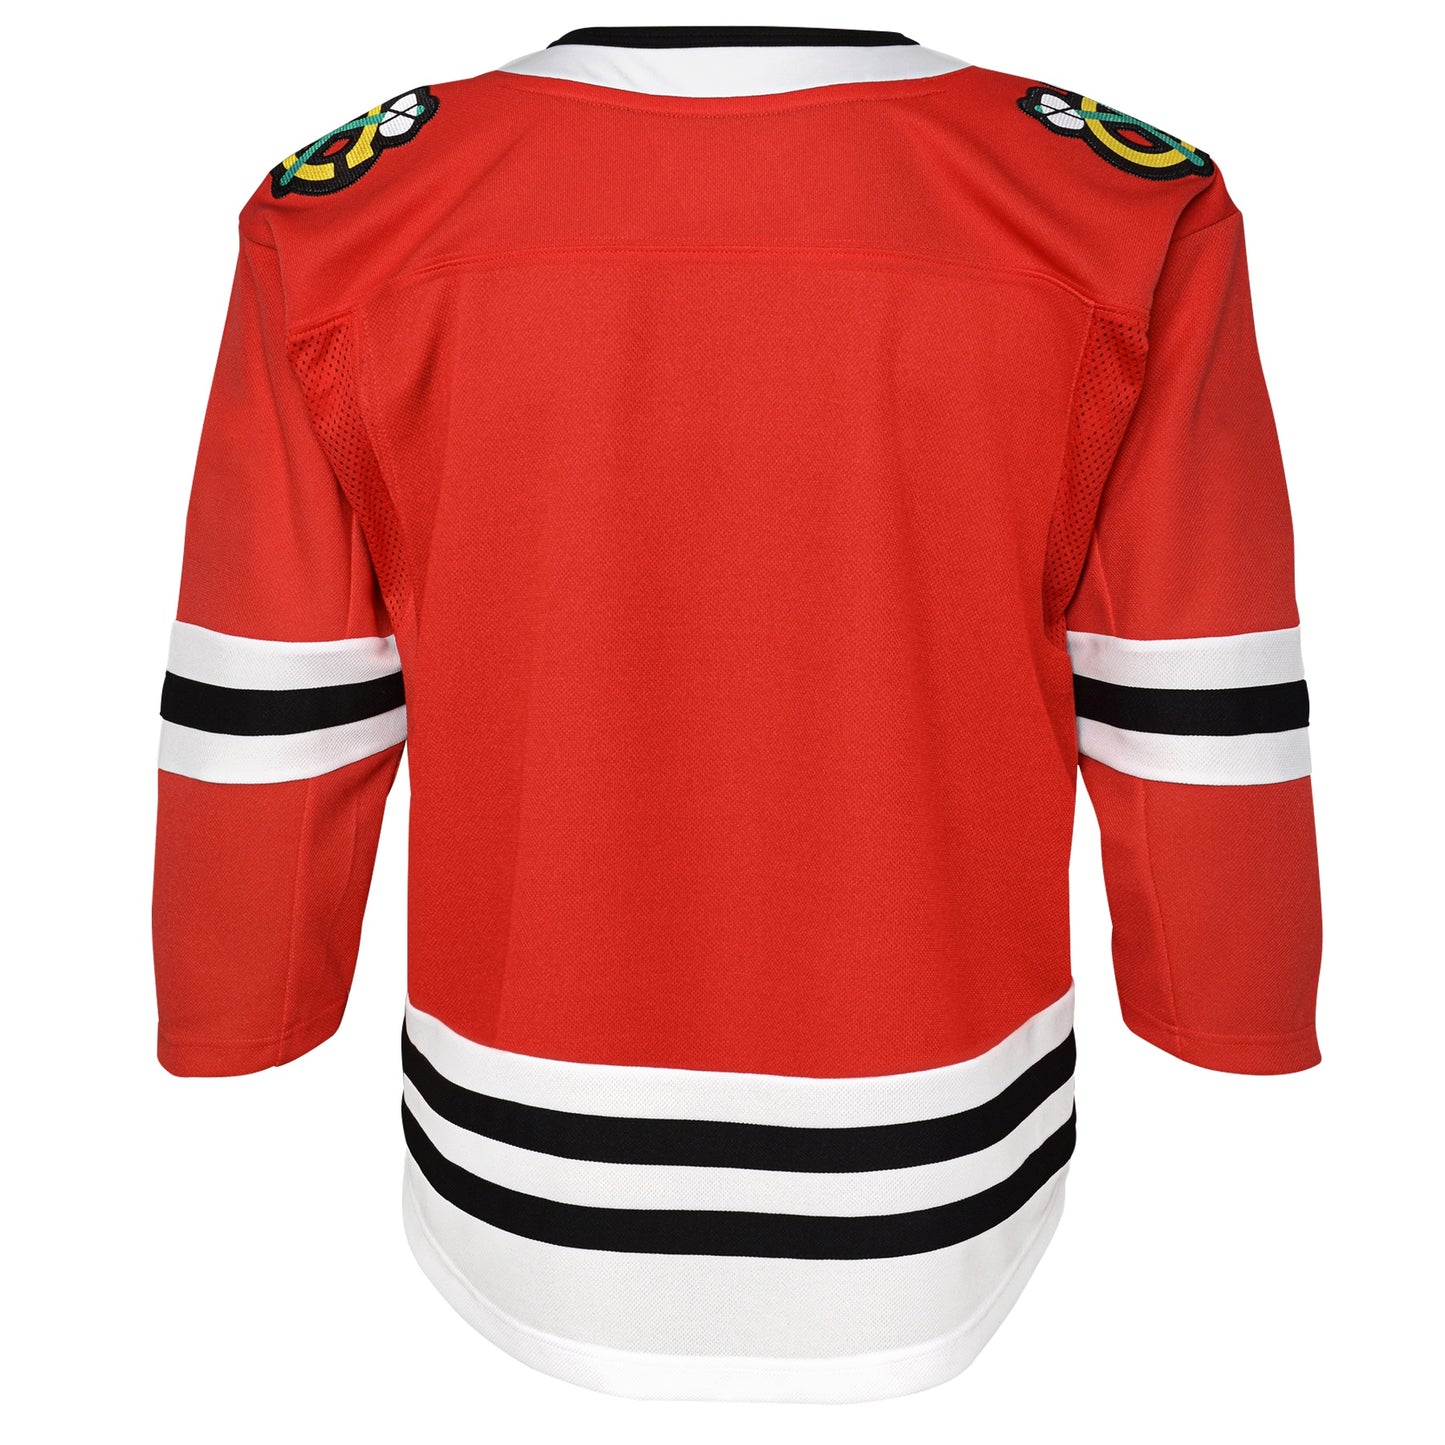 Chicago Blackhawks Red Home Premier Youth Jersey